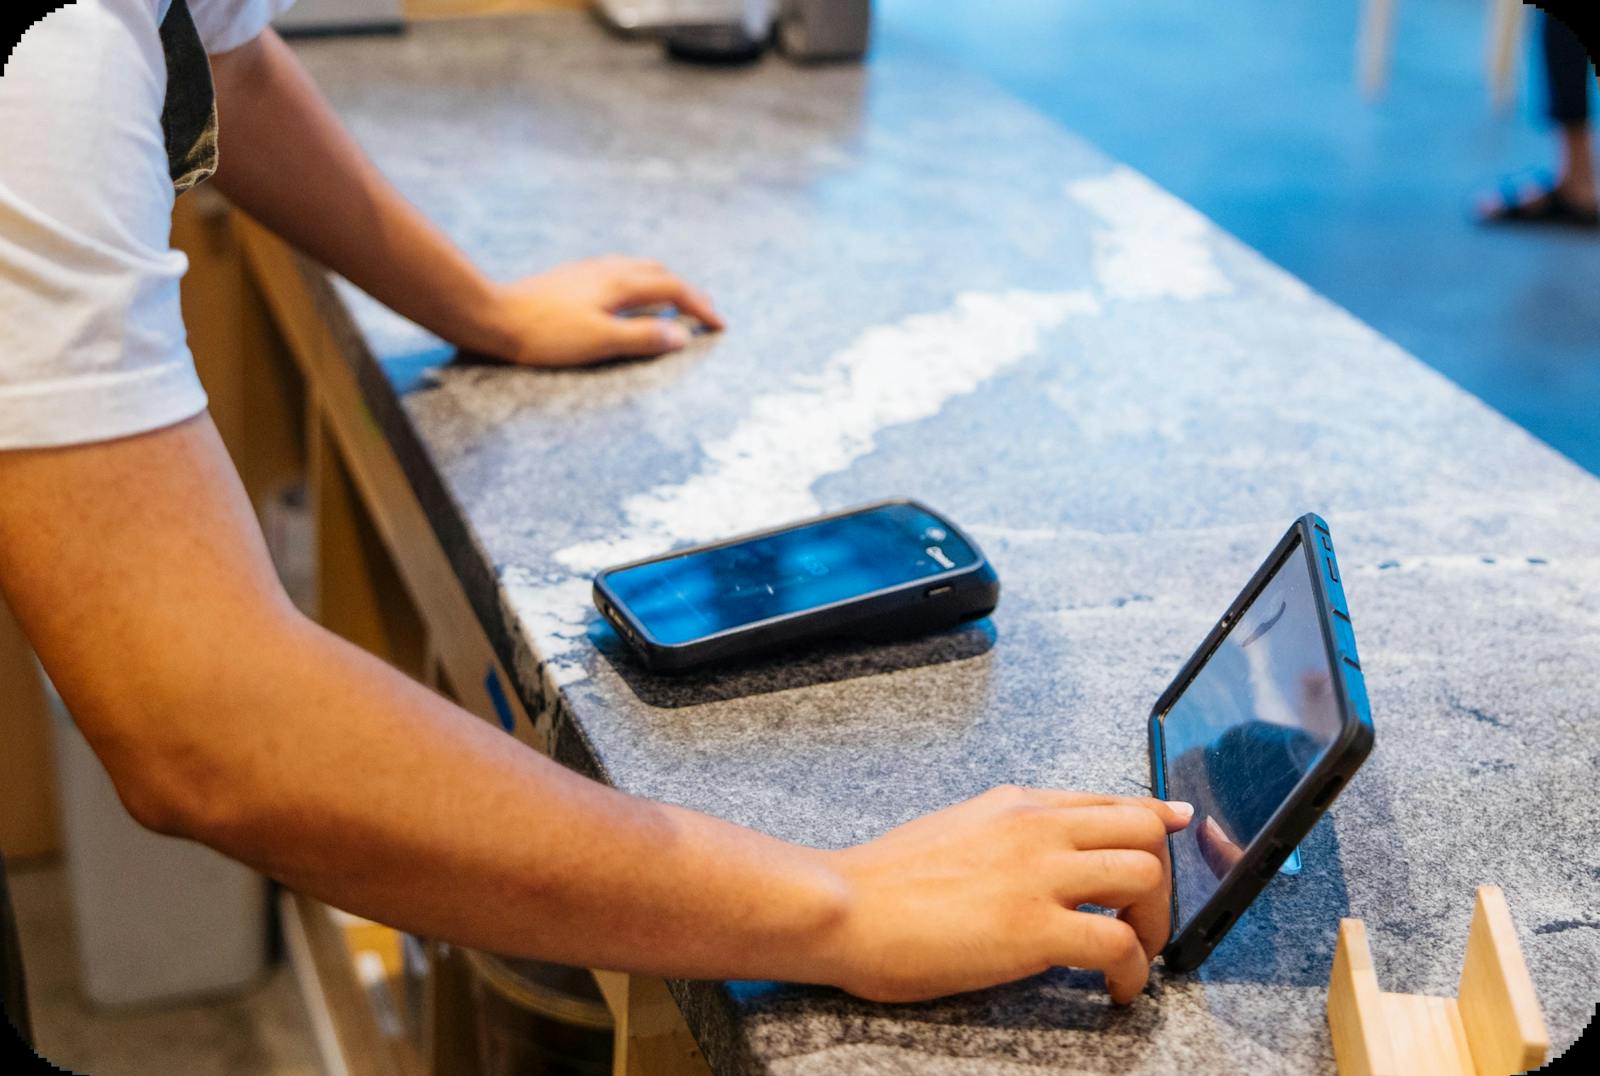 Image of a restaurant staff using a tablet at the counter